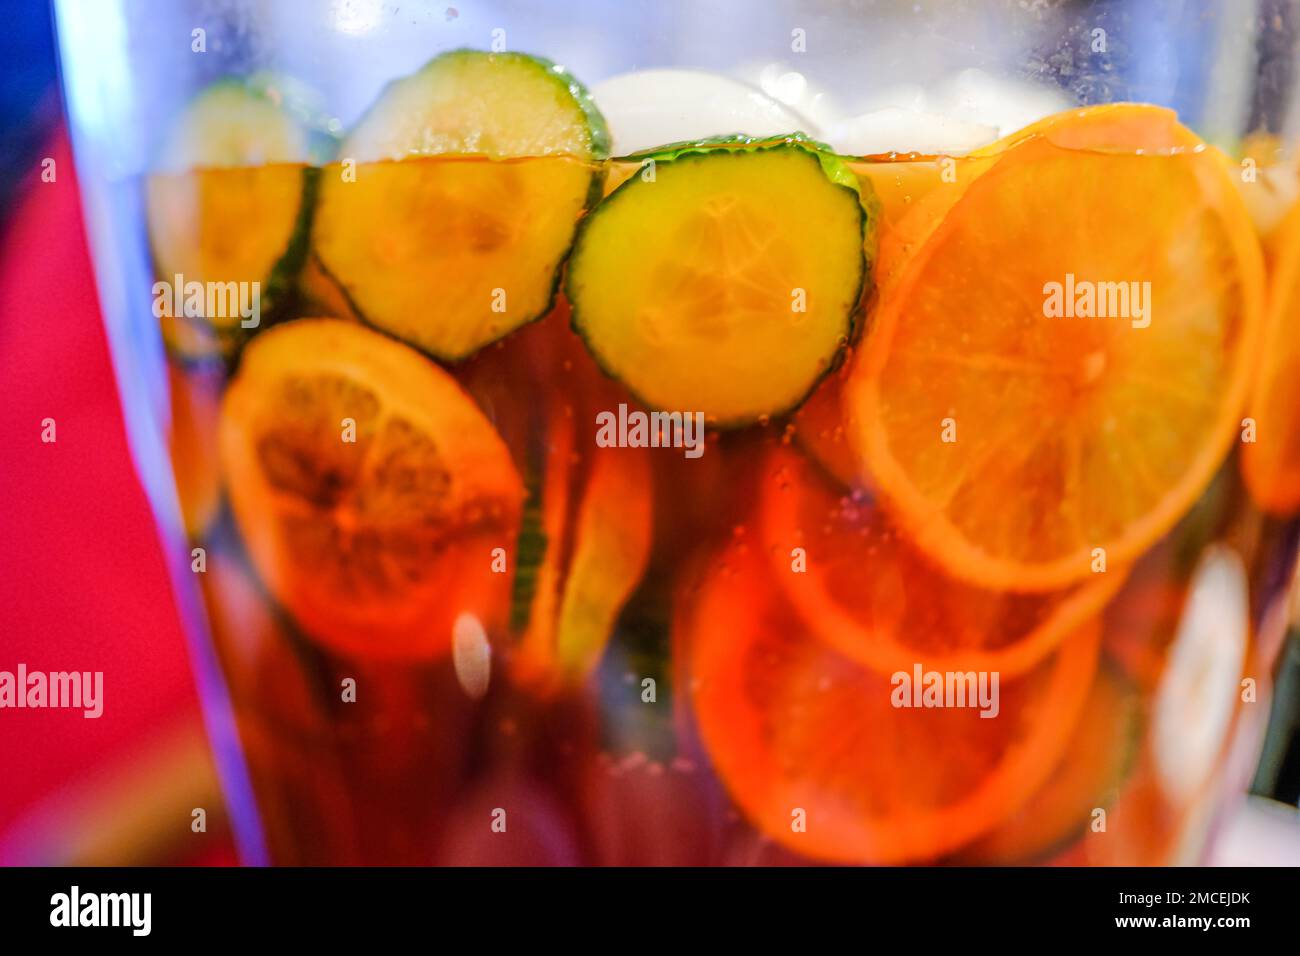 https://c8.alamy.com/comp/2MCEJDK/non-alcoholic-fruit-punch-in-dispenser-ready-to-drink-2MCEJDK.jpg